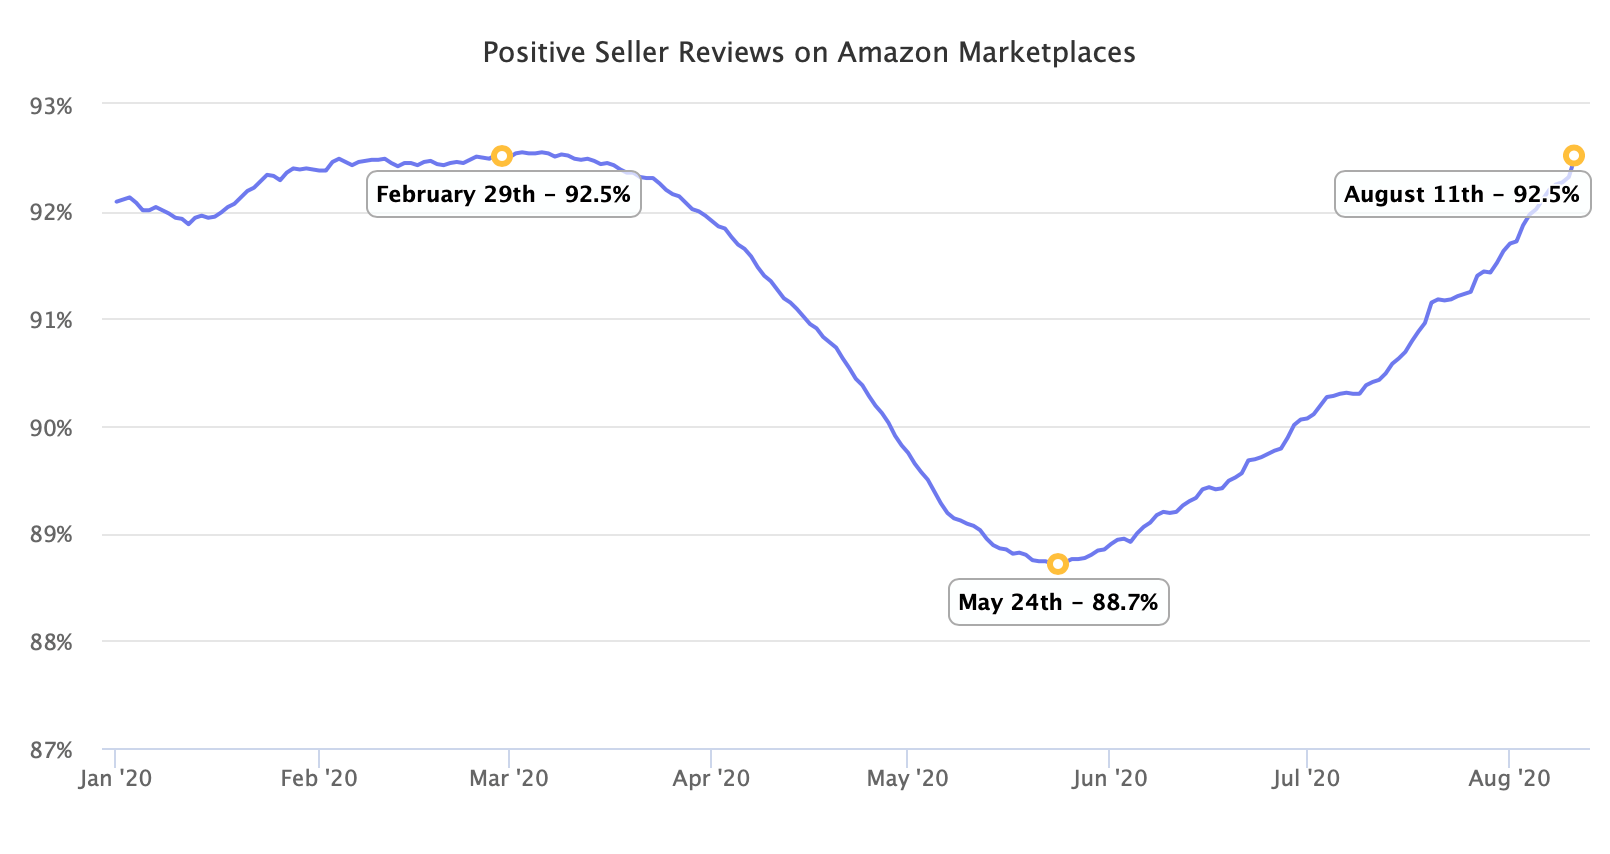 Positive Seller Reviews on Amazon Marketplaces